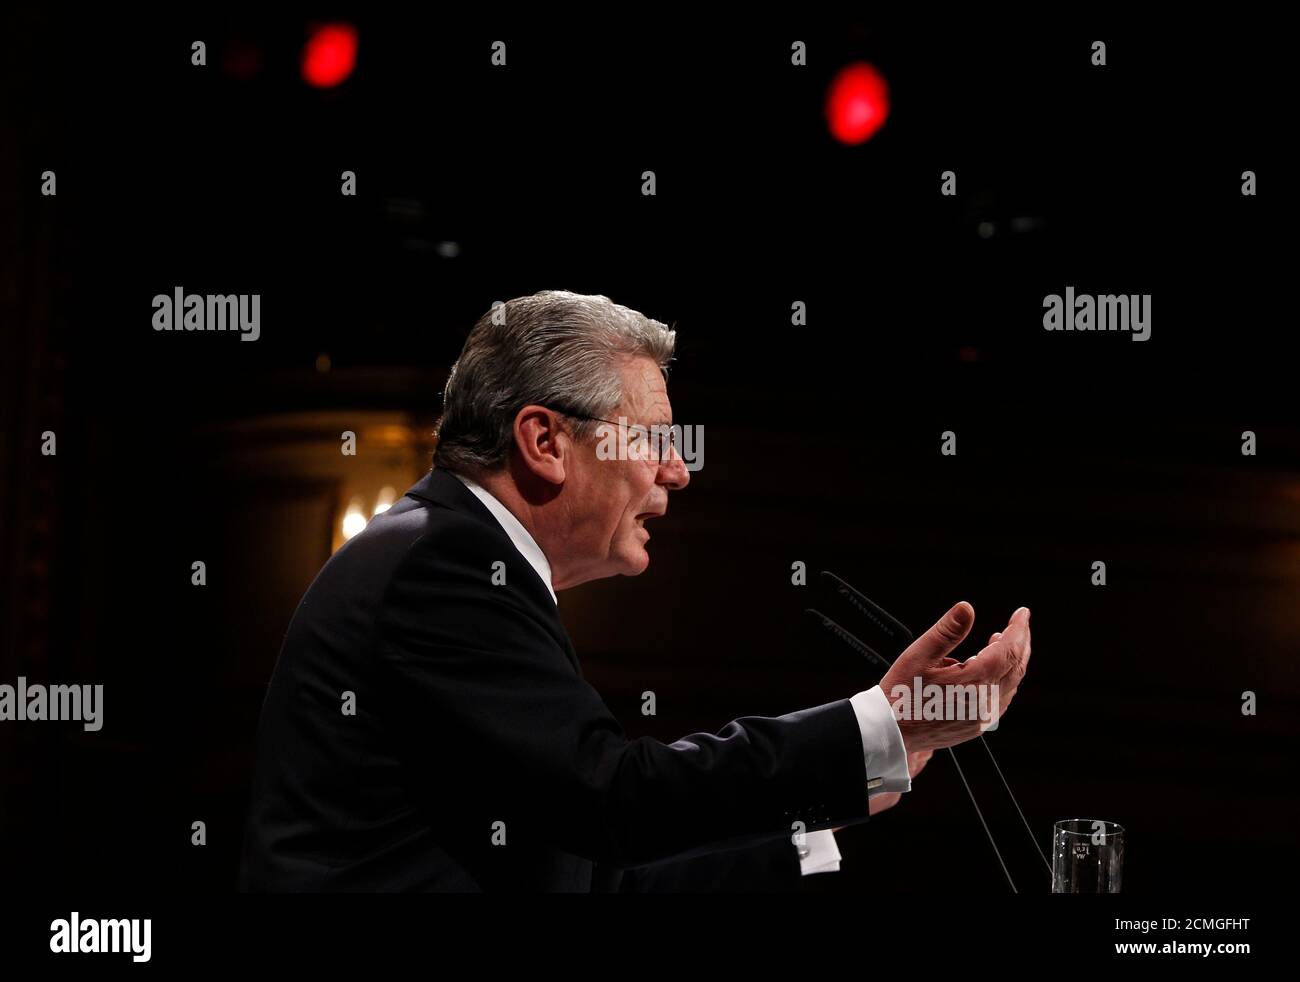 German presidential candidate Joachim Gauck delivers a speech in the Deutsches Theater (German Theatre) in Berlin, June 22, 2010. The vote for the largely ceremonial post of German president is shaping up as a big test for Chancellor Angela Merkel who has been dogged by falling popularity, policy spats in her centre-right coalition and accusations of weak leadership. A failure by Merkel to push through the conservative candidate Christian Wulff, the premier of the state of Lower Saxony, would be widely viewed as a major defeat for her. Gauck, a former Protestant pastor who played an important  Stock Photo